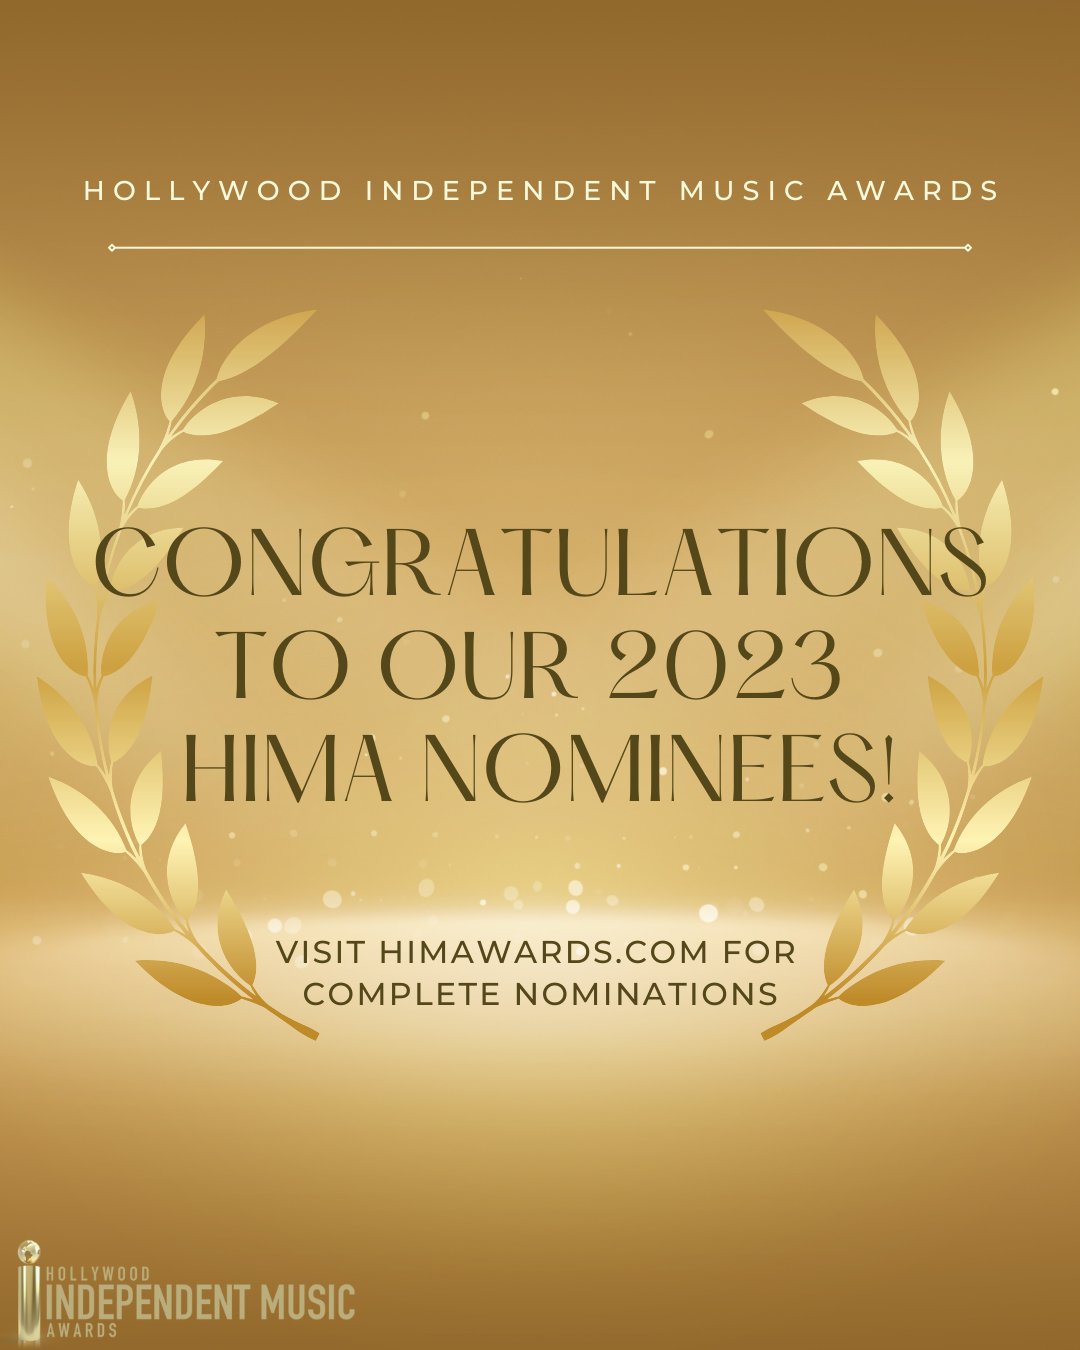 Hollywood Independent Music Awards on X: We have curated a group